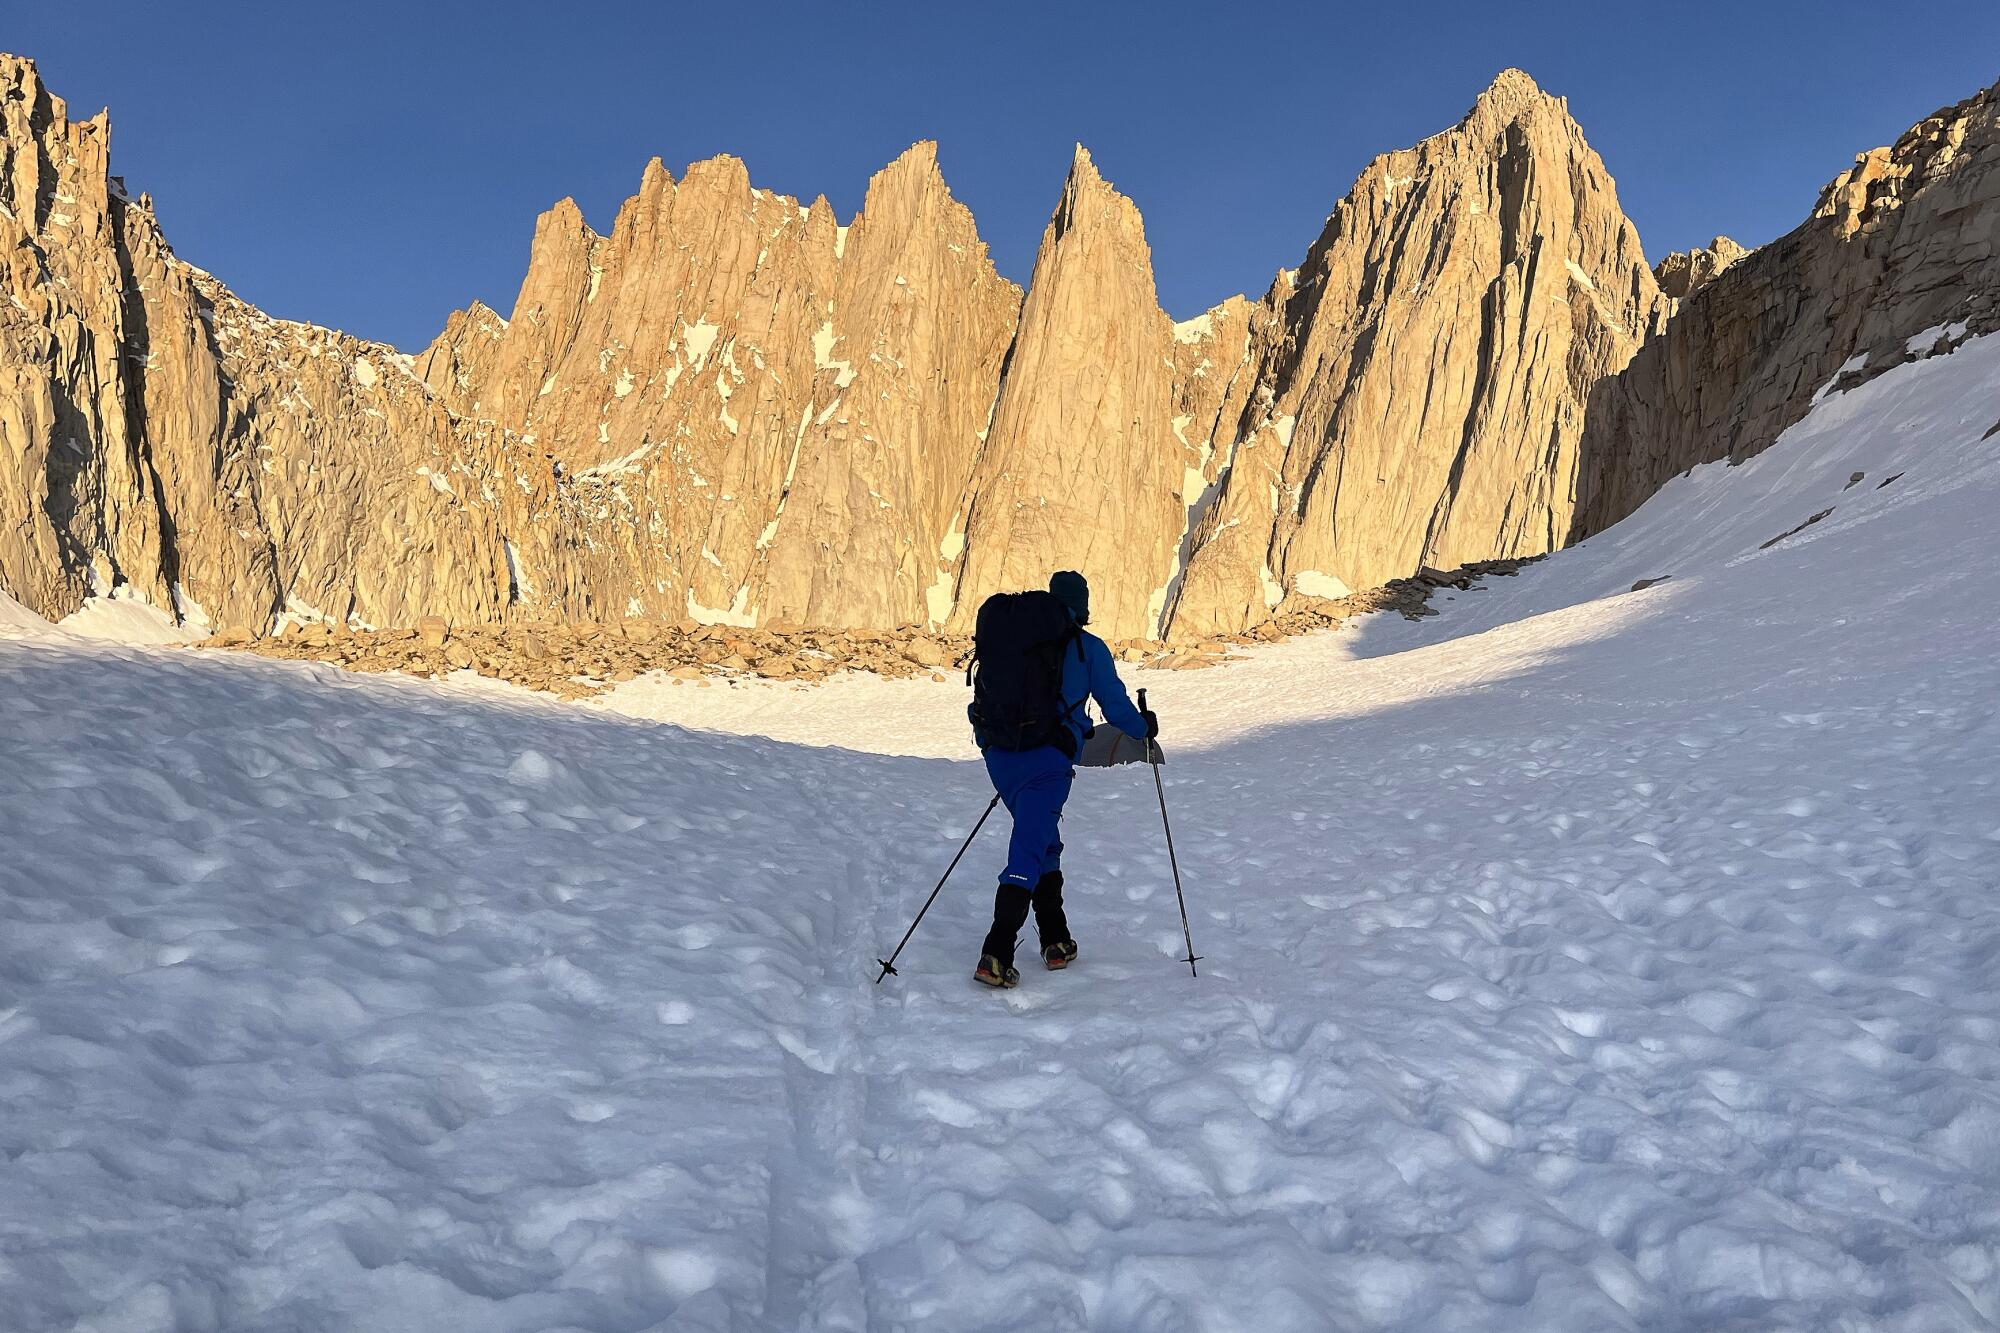 Mt. Whitney: A perilous trek to the top of California's record